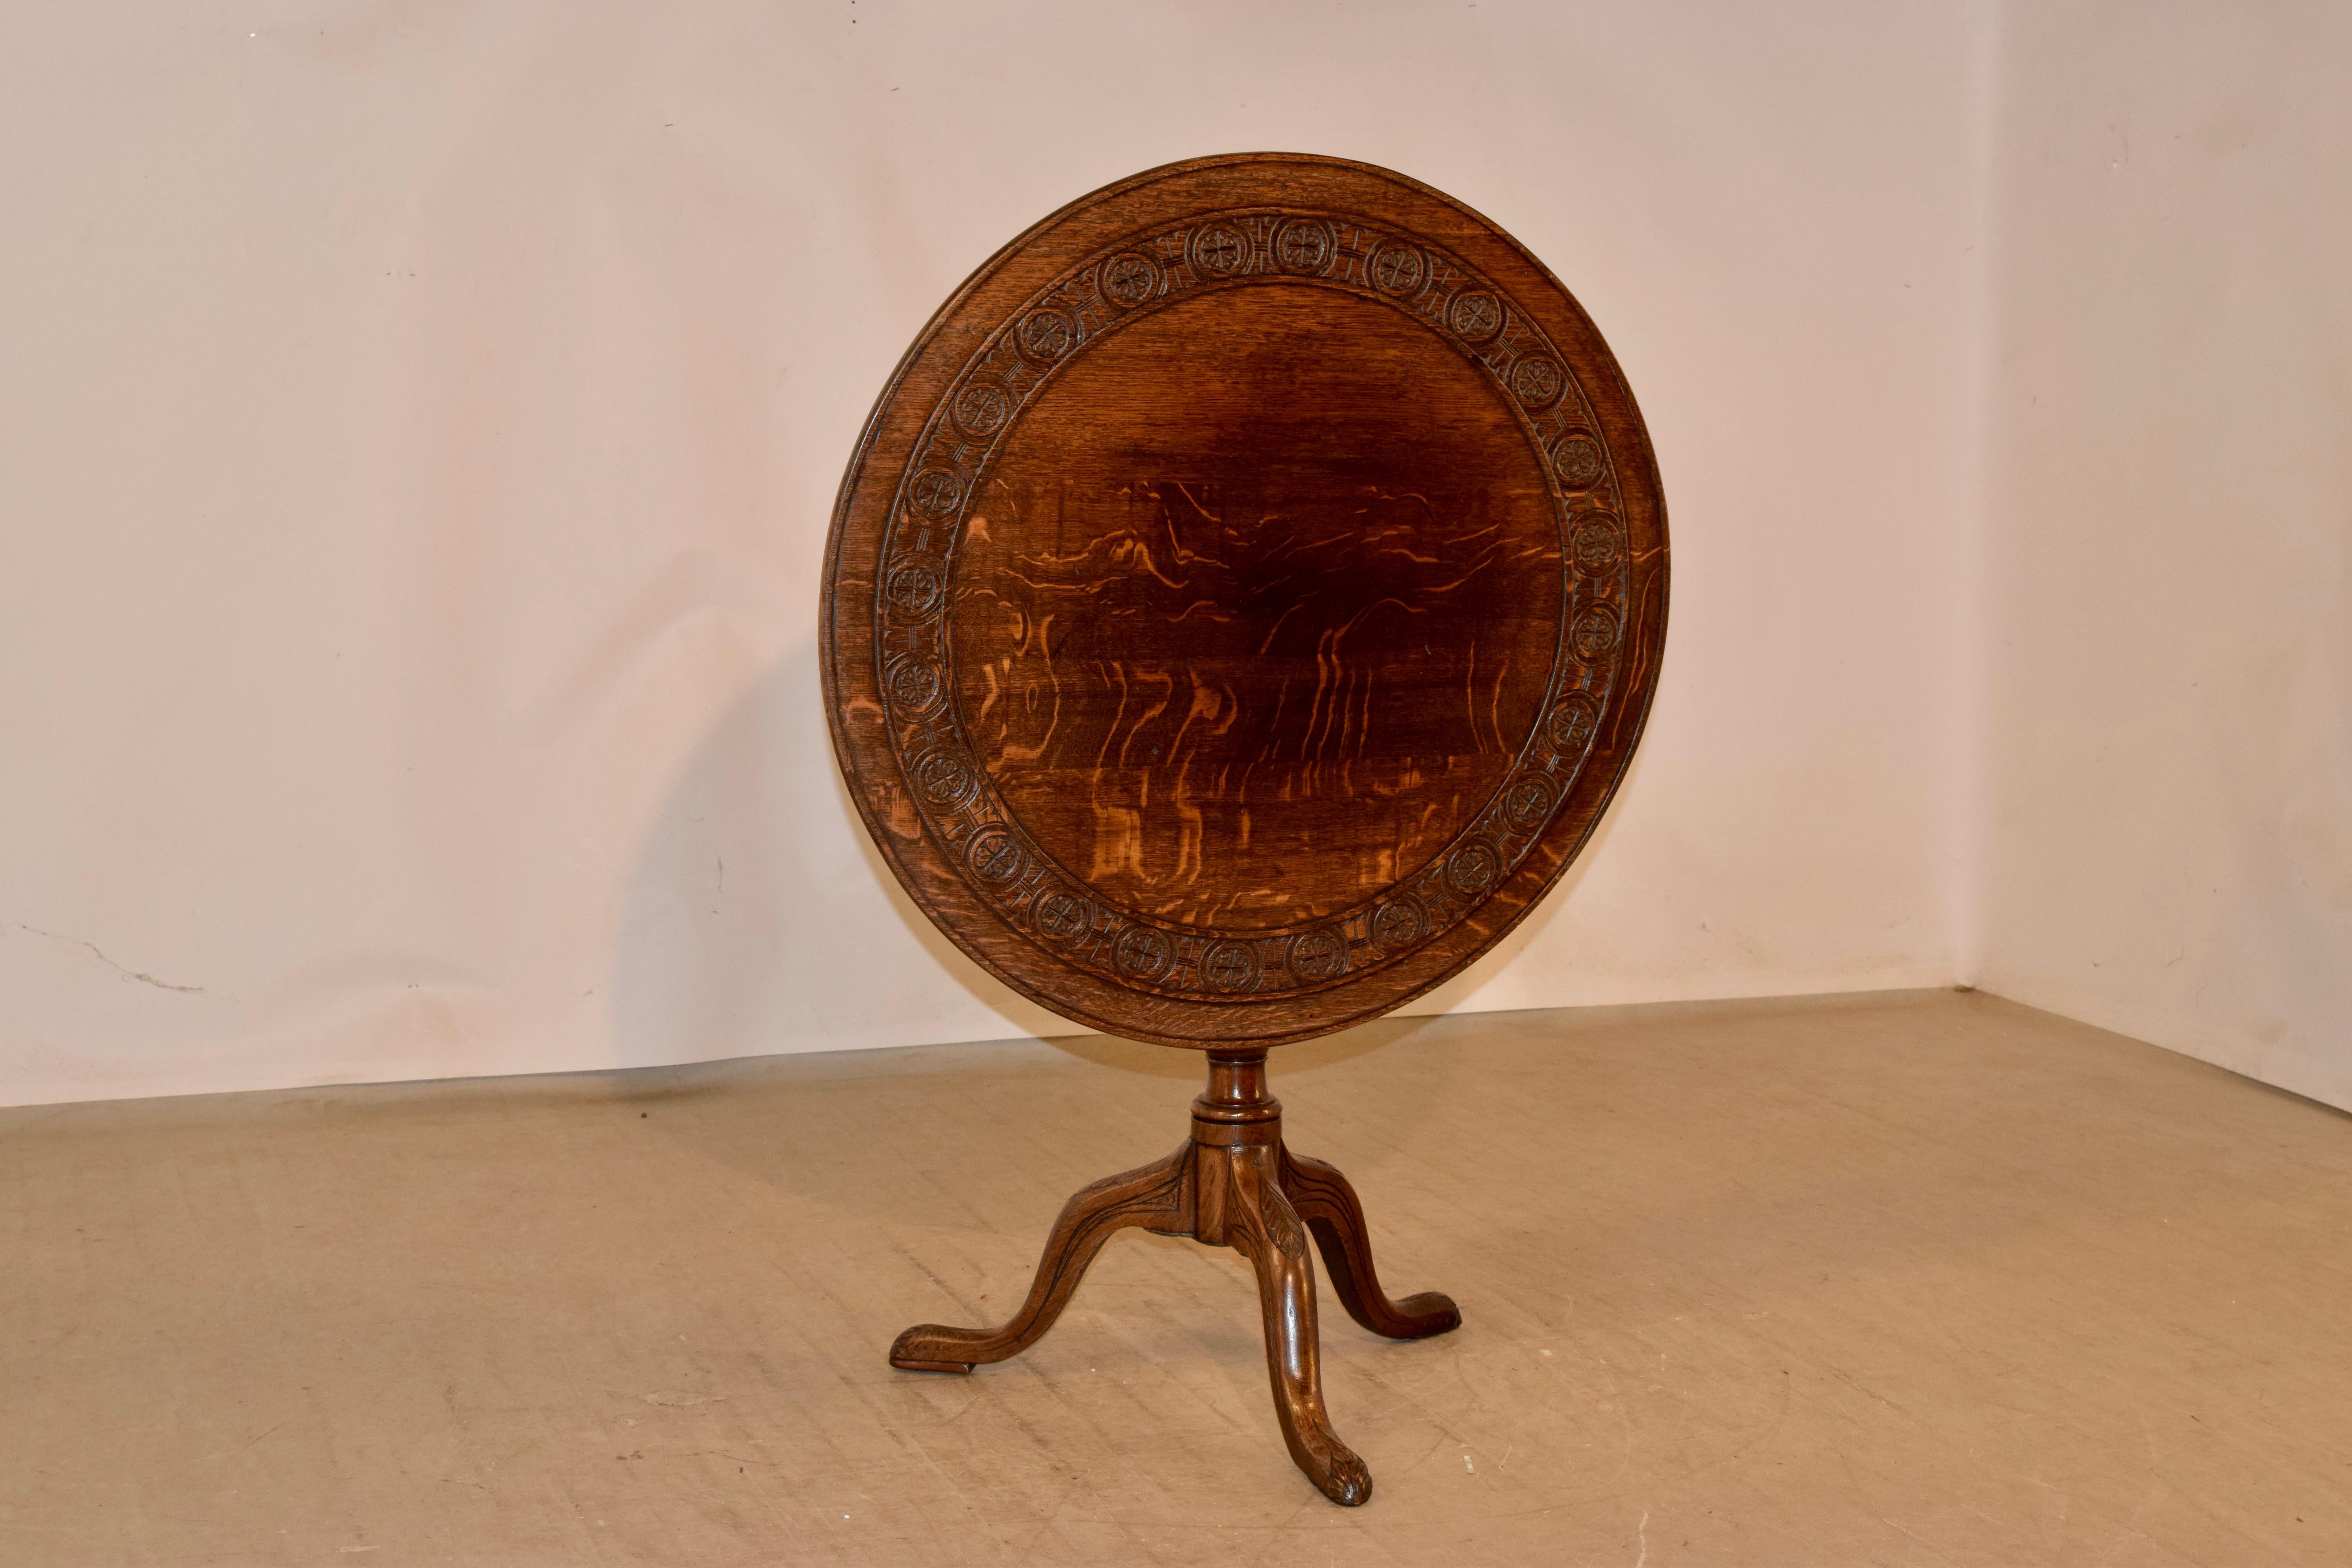 18th Century oak tilt-top table from England with a beveled edge, surrounding a hand carved band. The top rests on a hand turned vase shaped central column, supported on three legs, all with decorative hand carved accents. the feet are padded, and